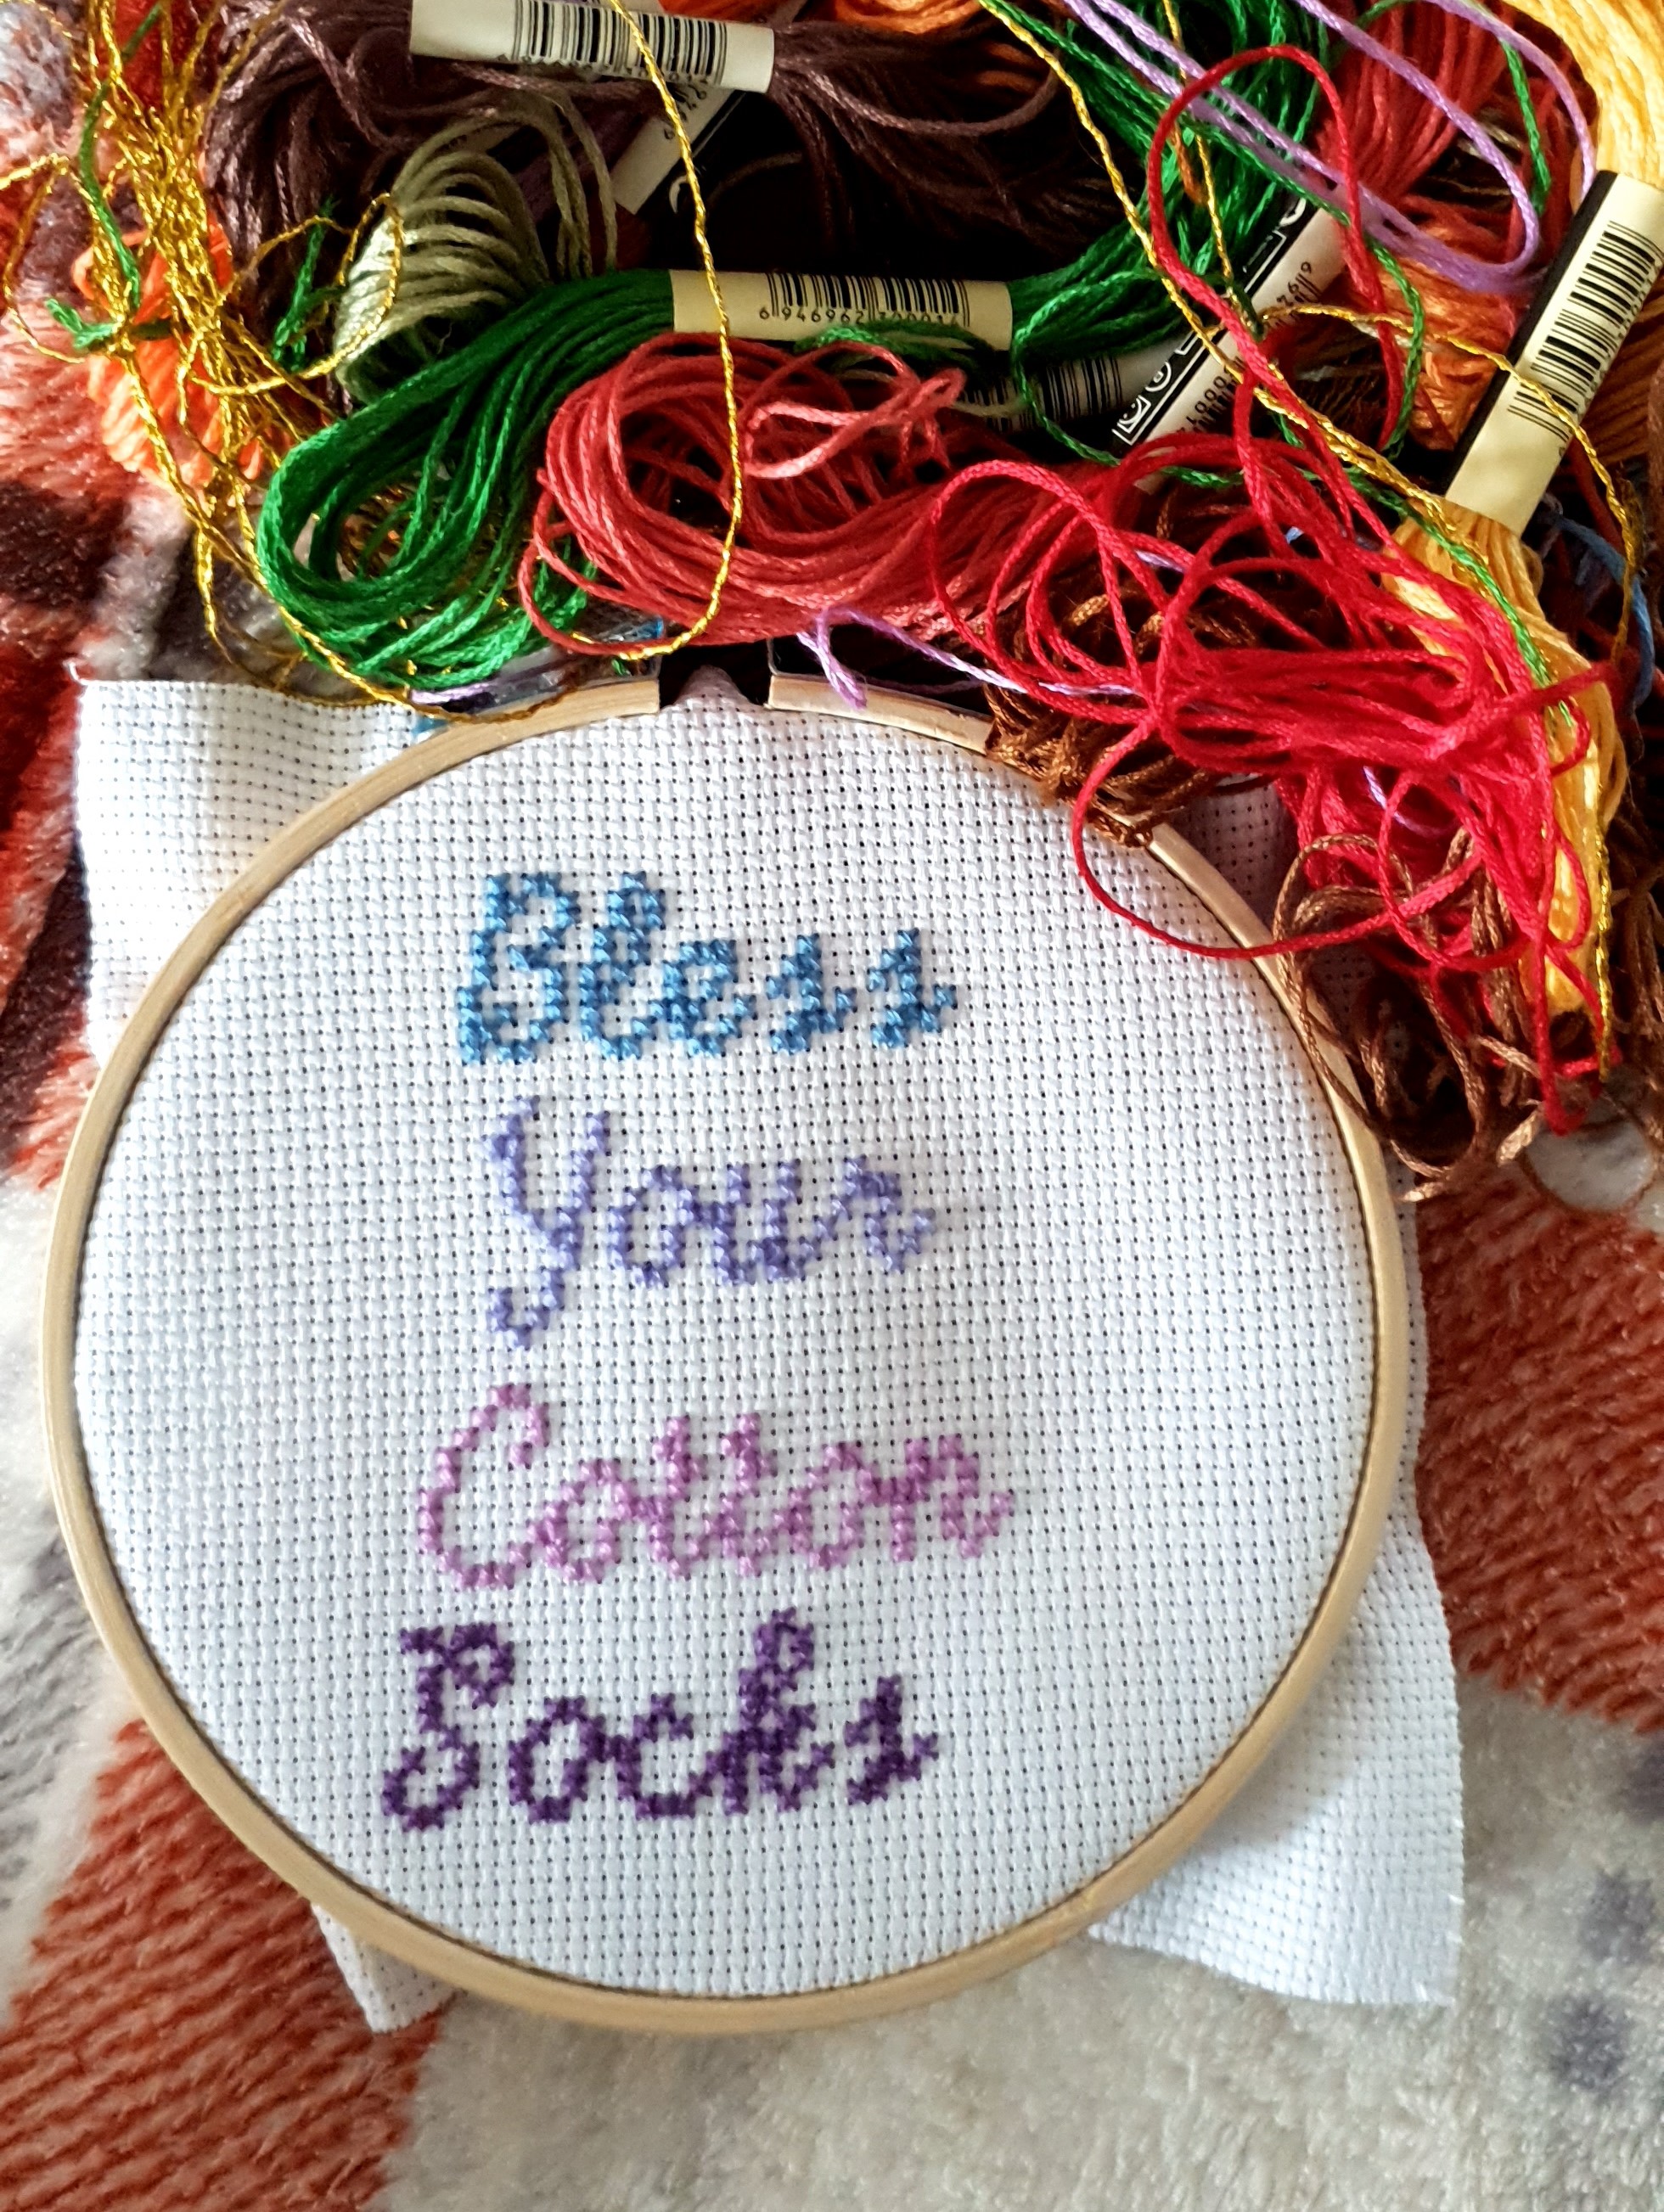 15 Top Tips for Cross Stitch Beginners 